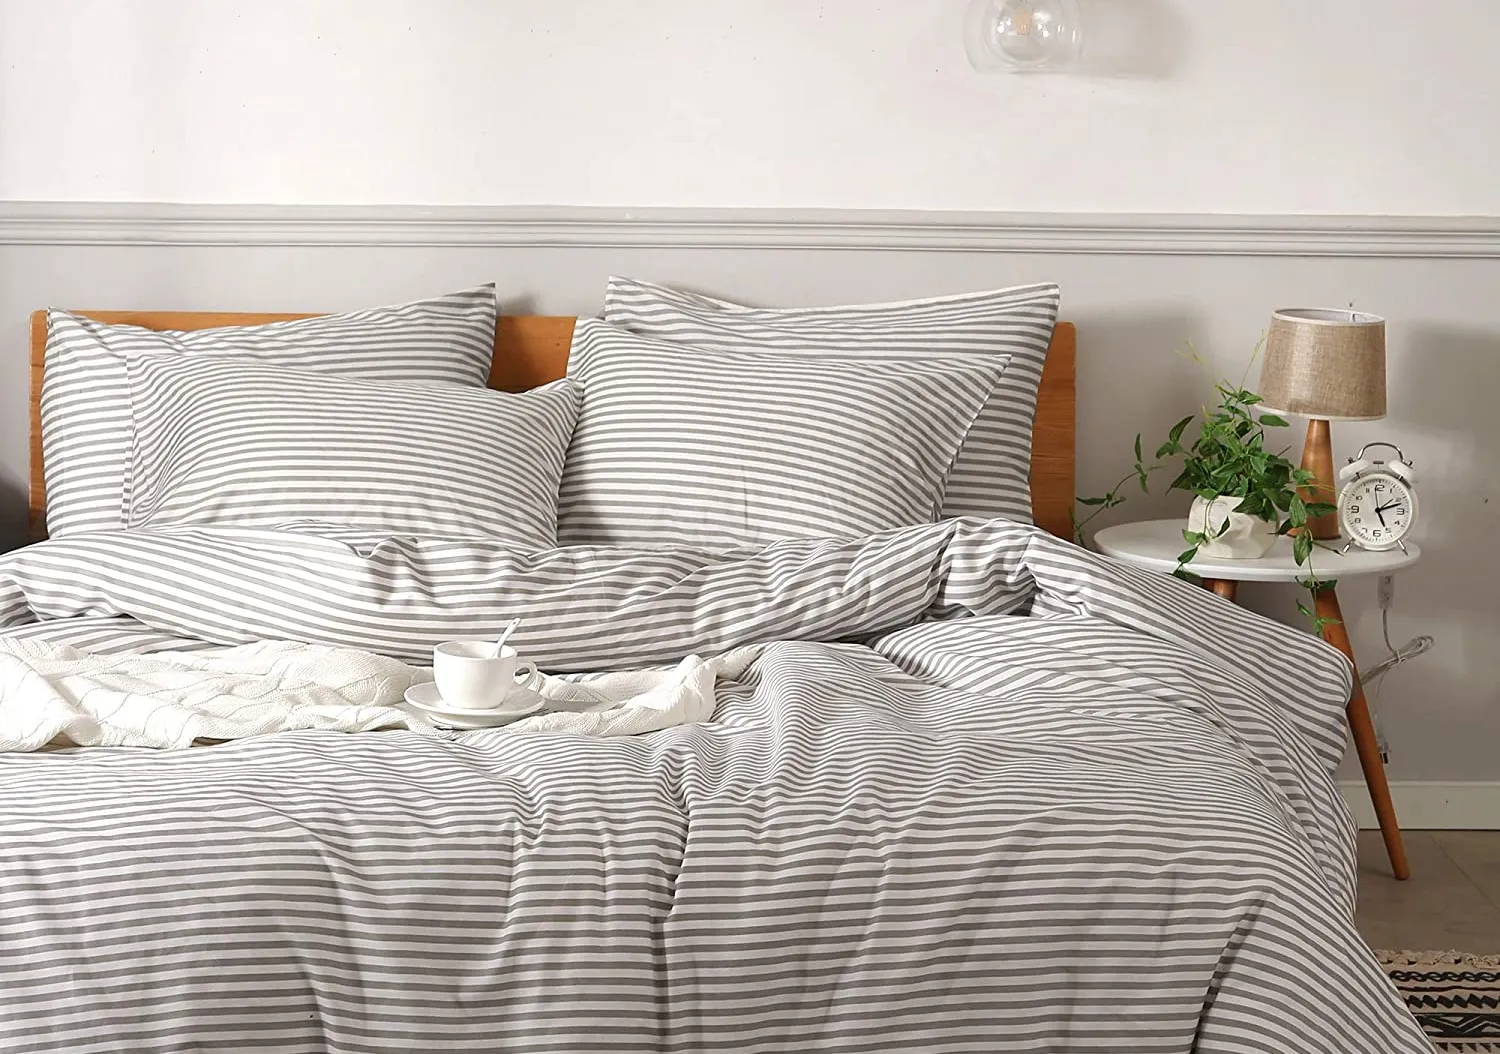 Where to Find Cheap Bedding Without Compromising on Quality?